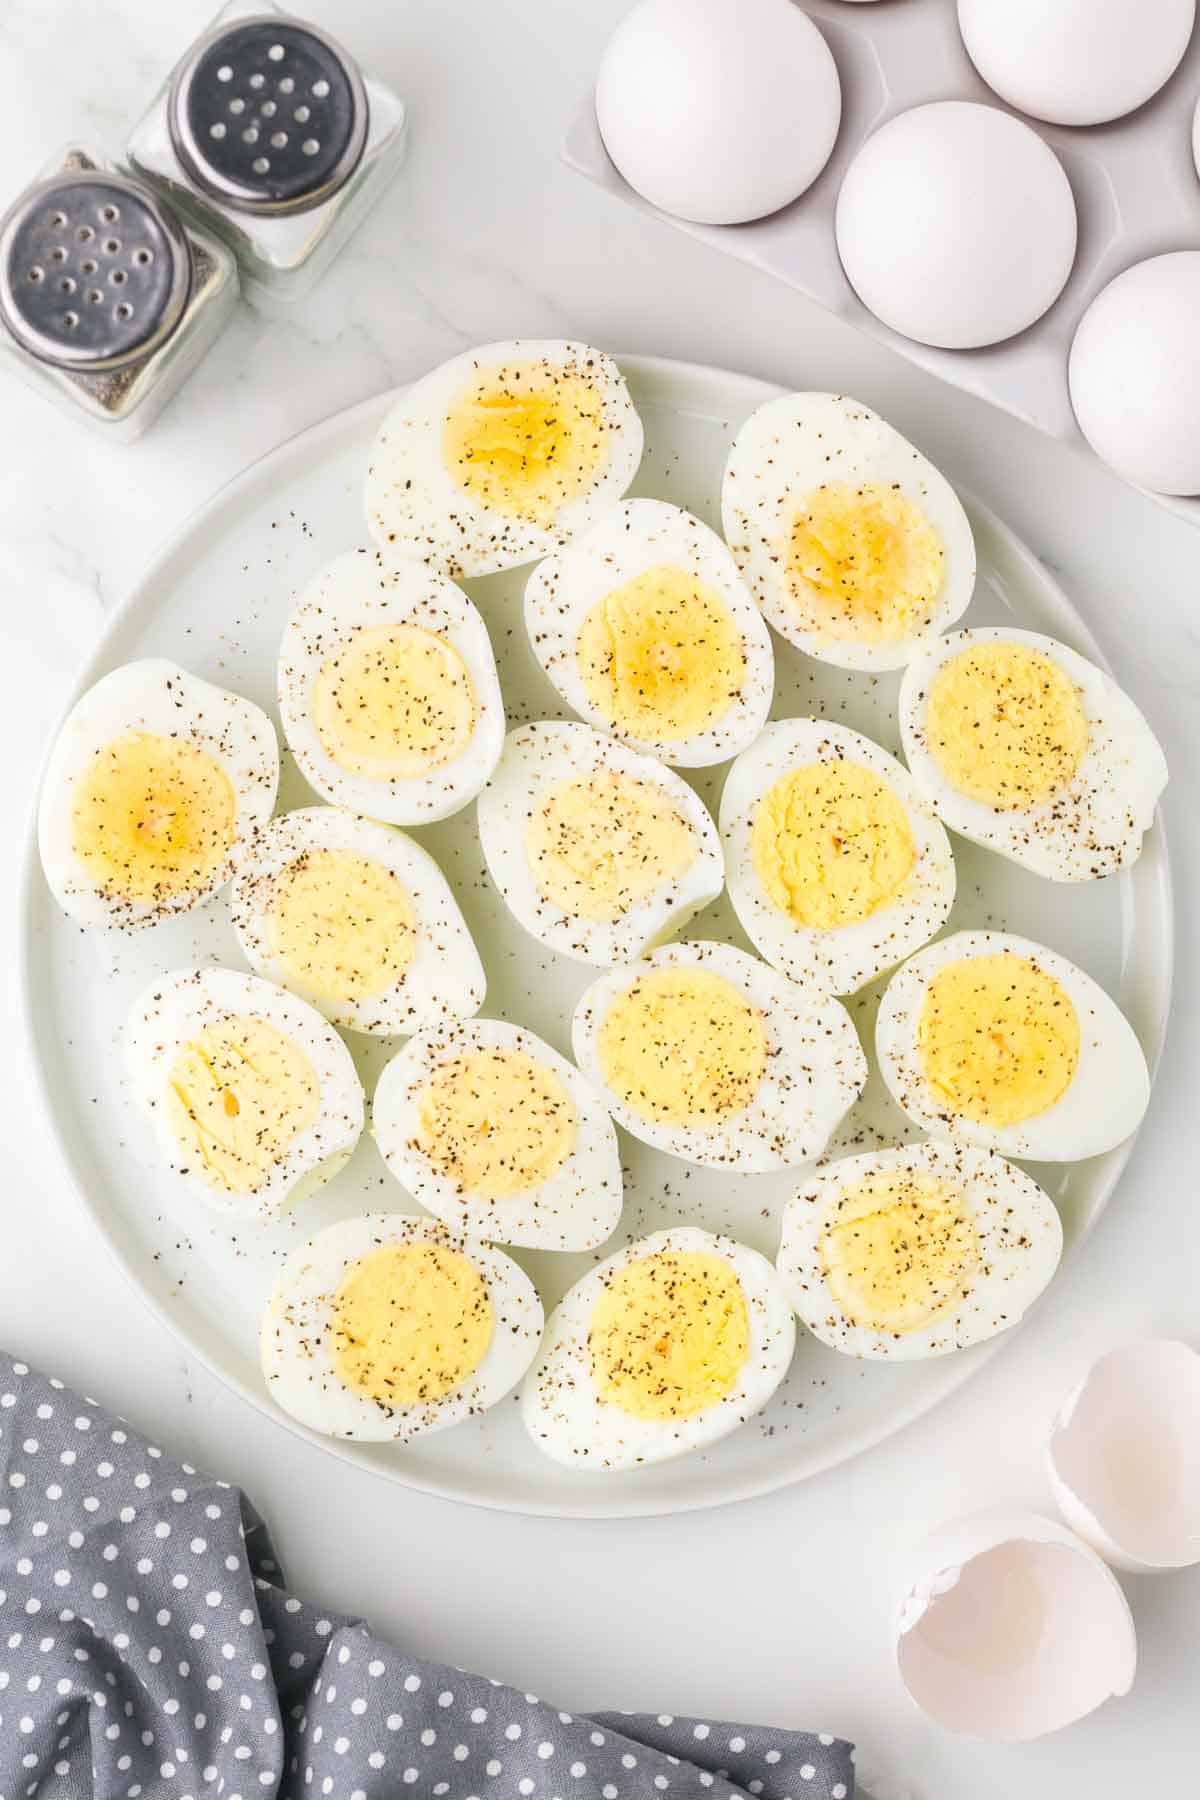 a plate of halved hard boiled eggs with seasoning on top